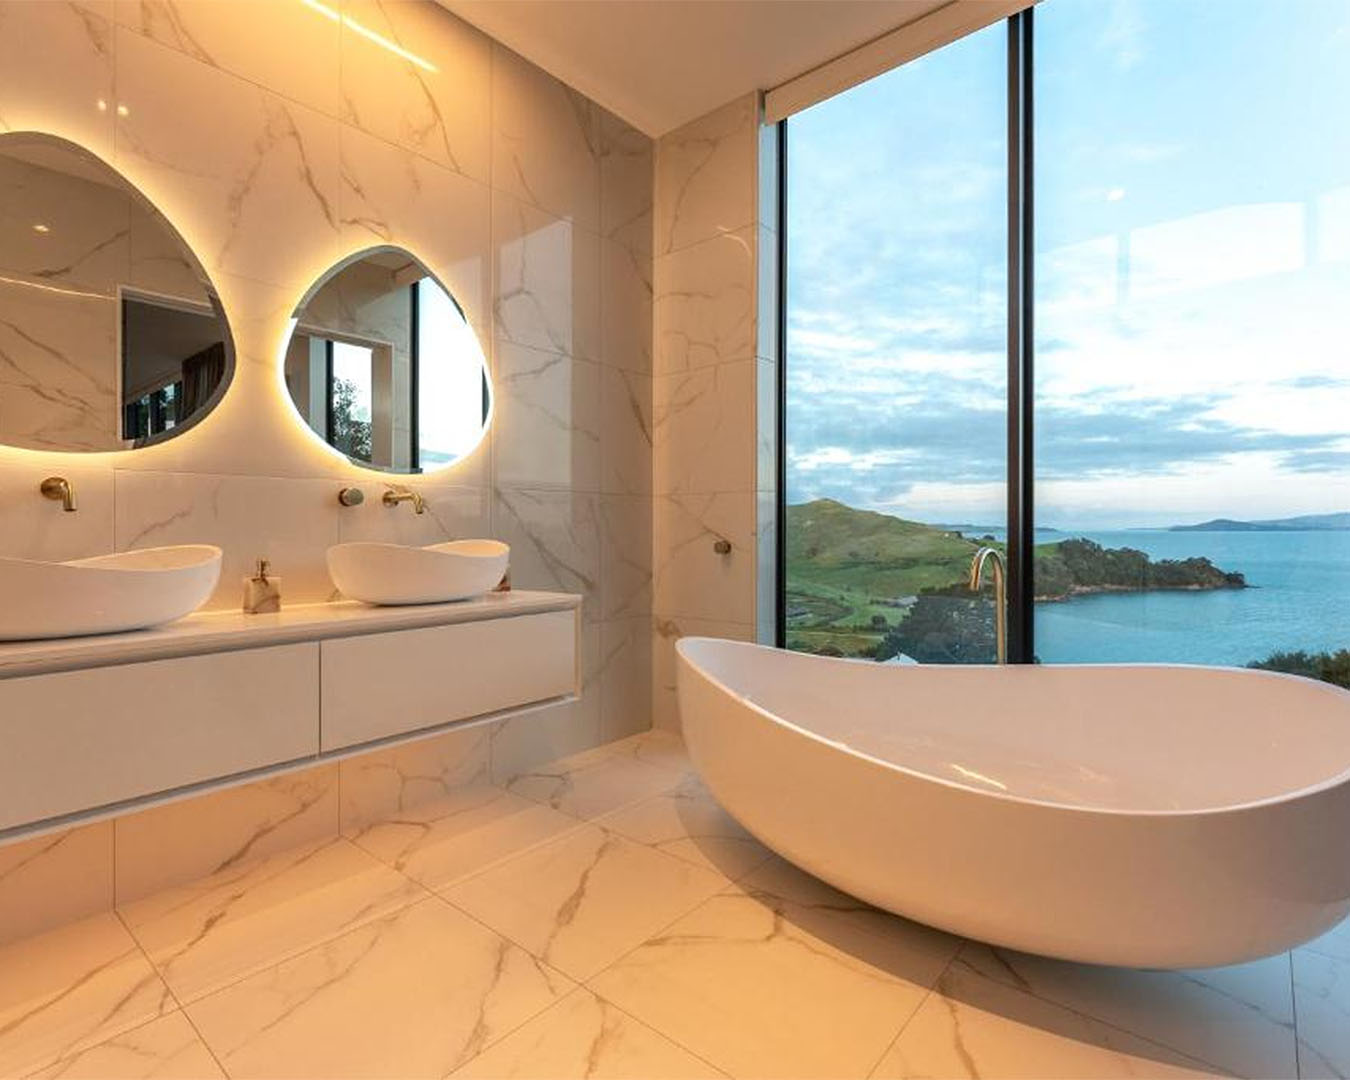 The bathroom overlooking the water at Omaha Luxury Villa, one of the most romantic getaways in Auckland. 